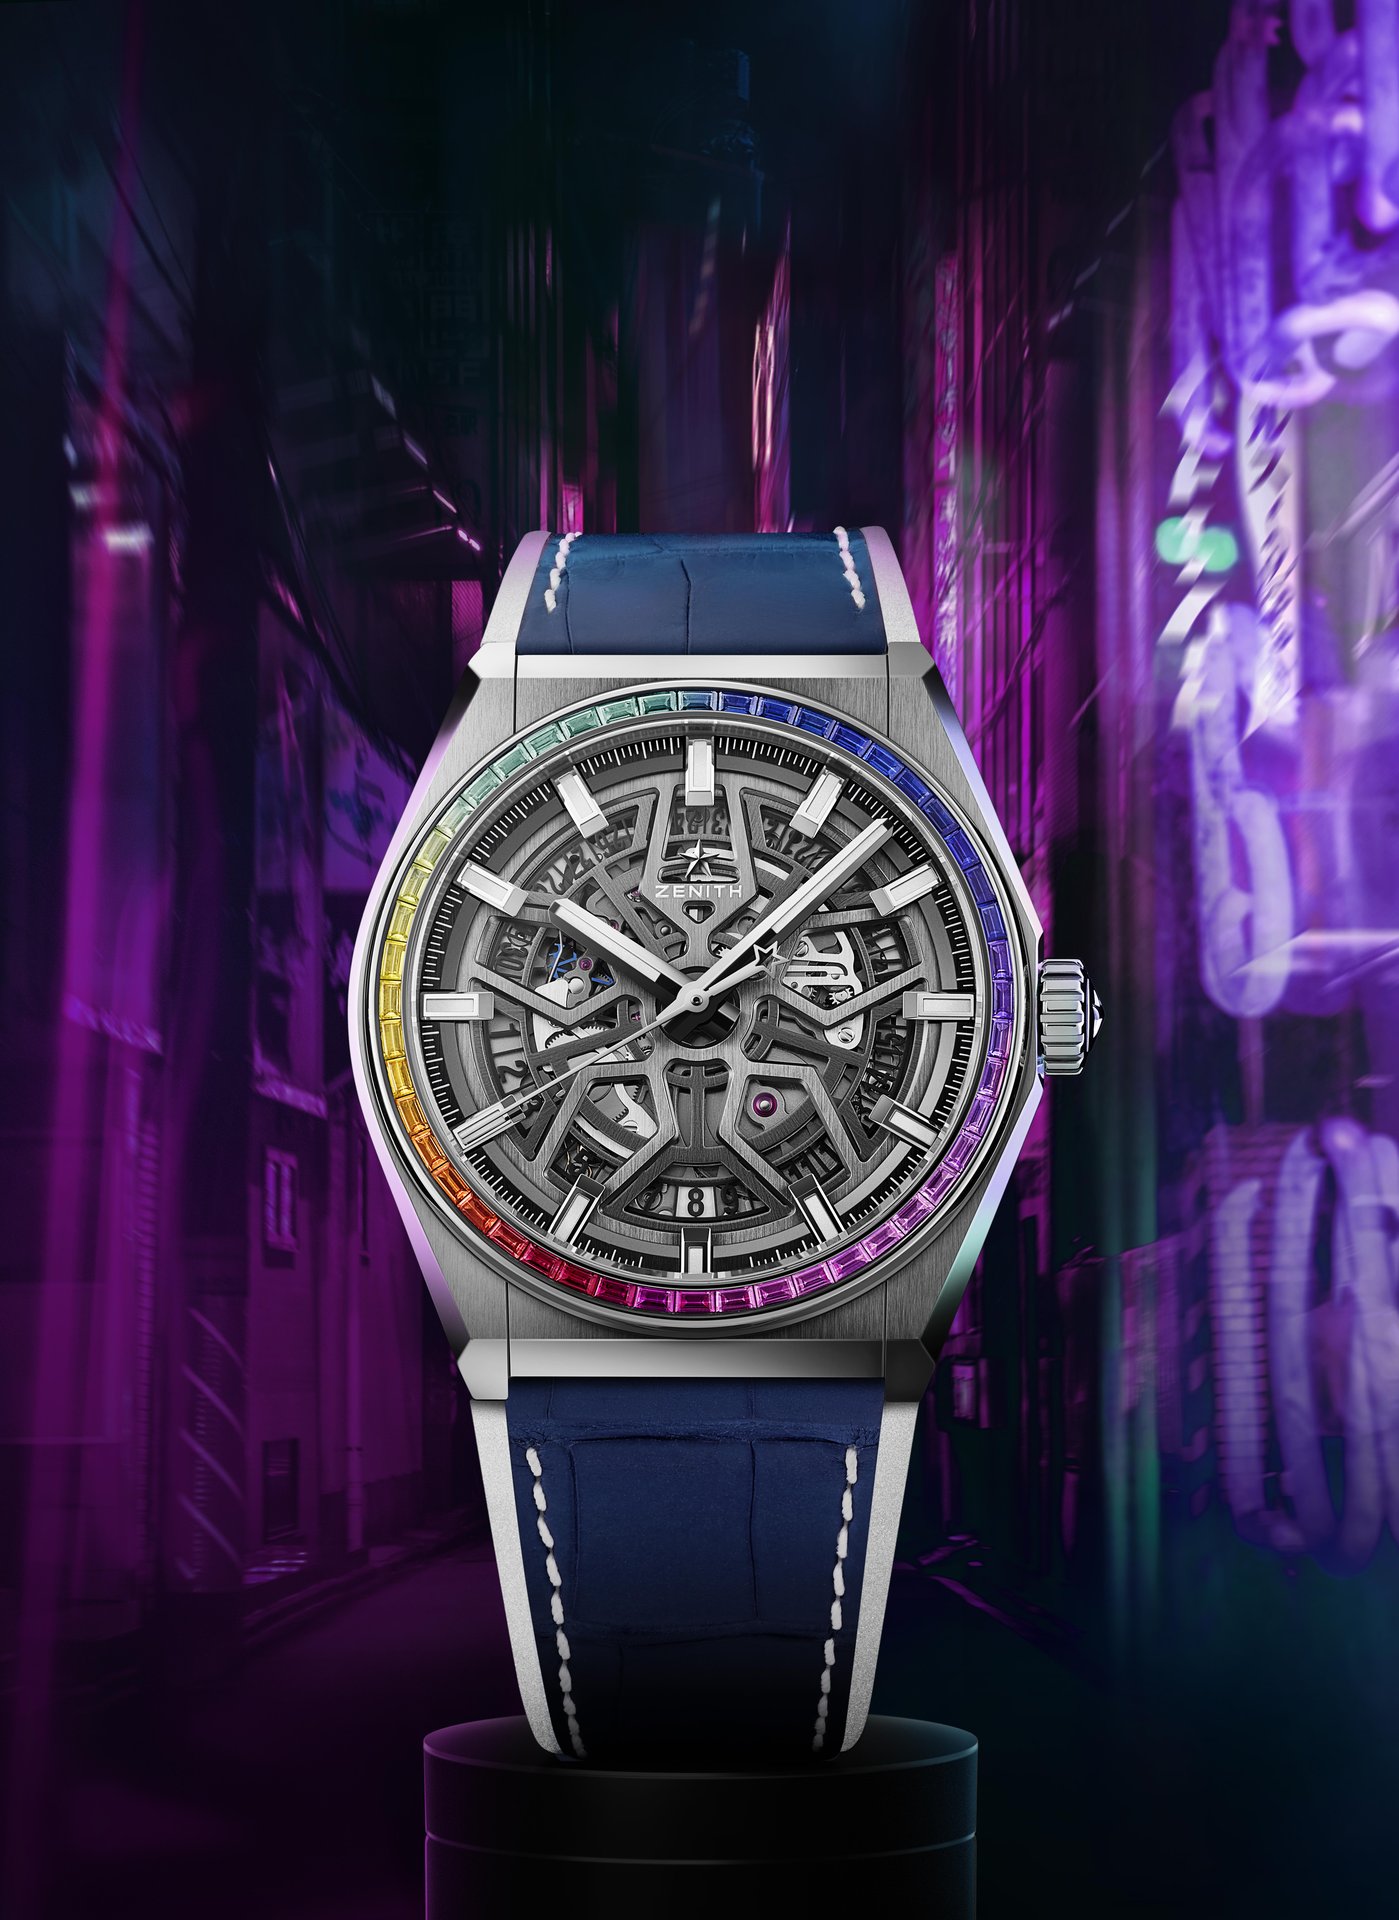 Introducing The Rainbow-Themed Zenith Defy Chroma II In Black or